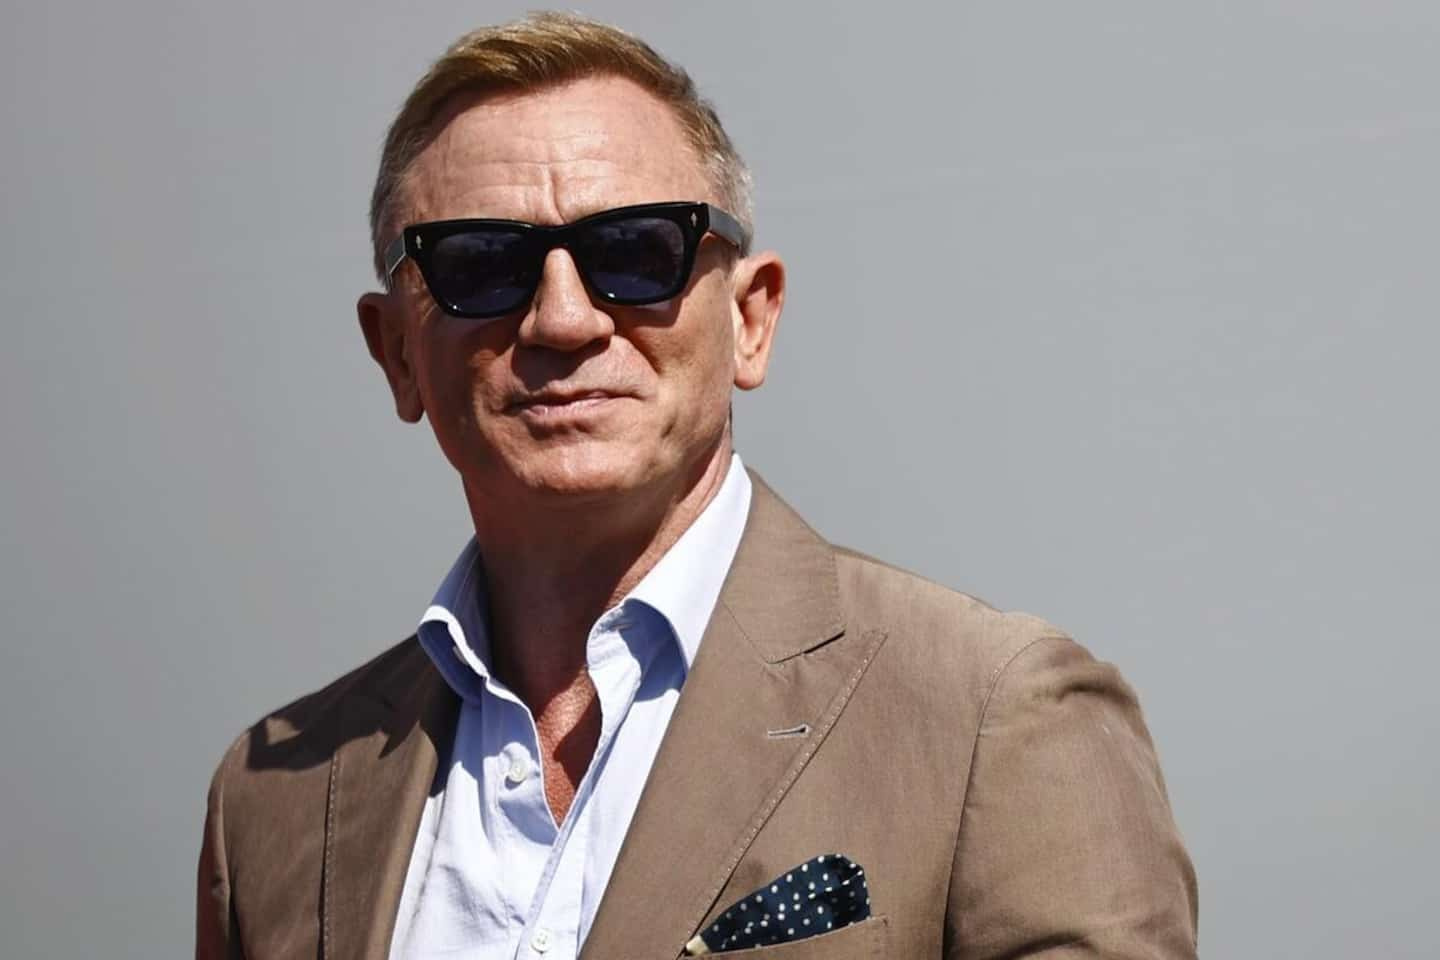 Daniel Craig does not plan to leave an inheritance to his children